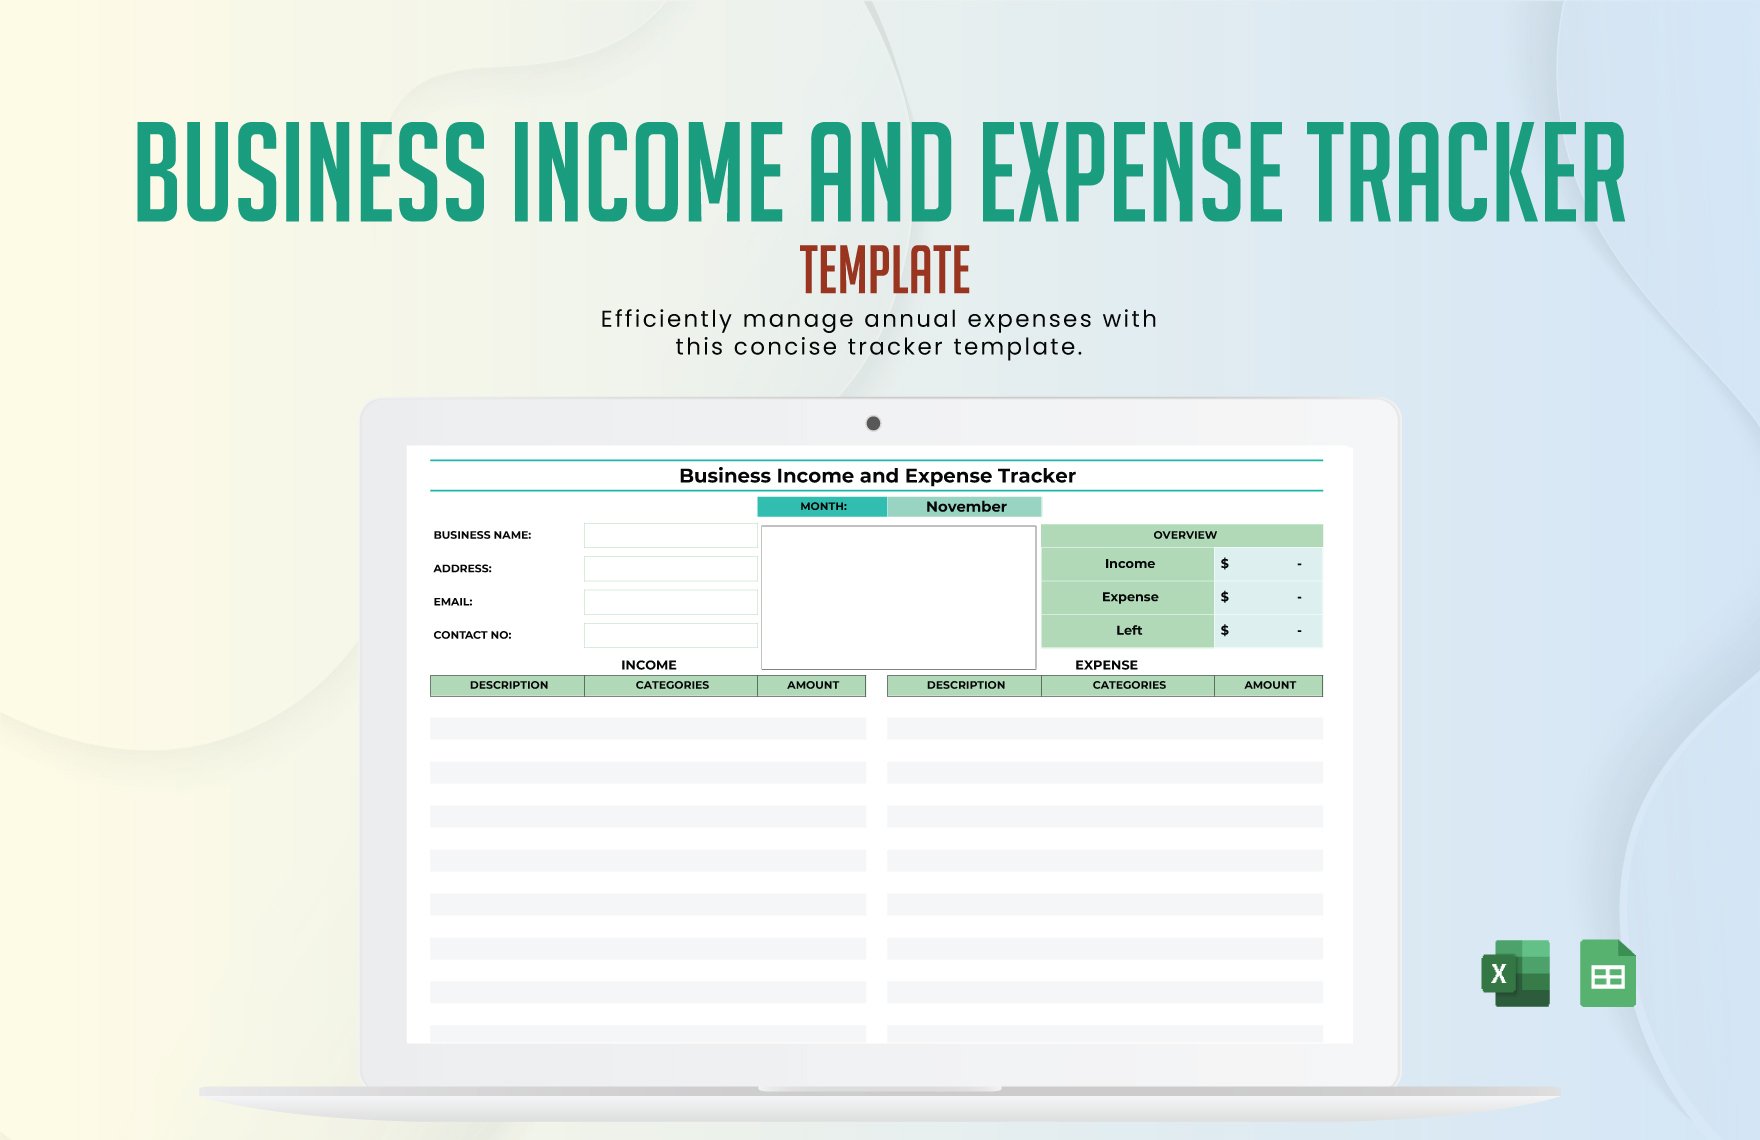 Business Income and Expense Tracker Template